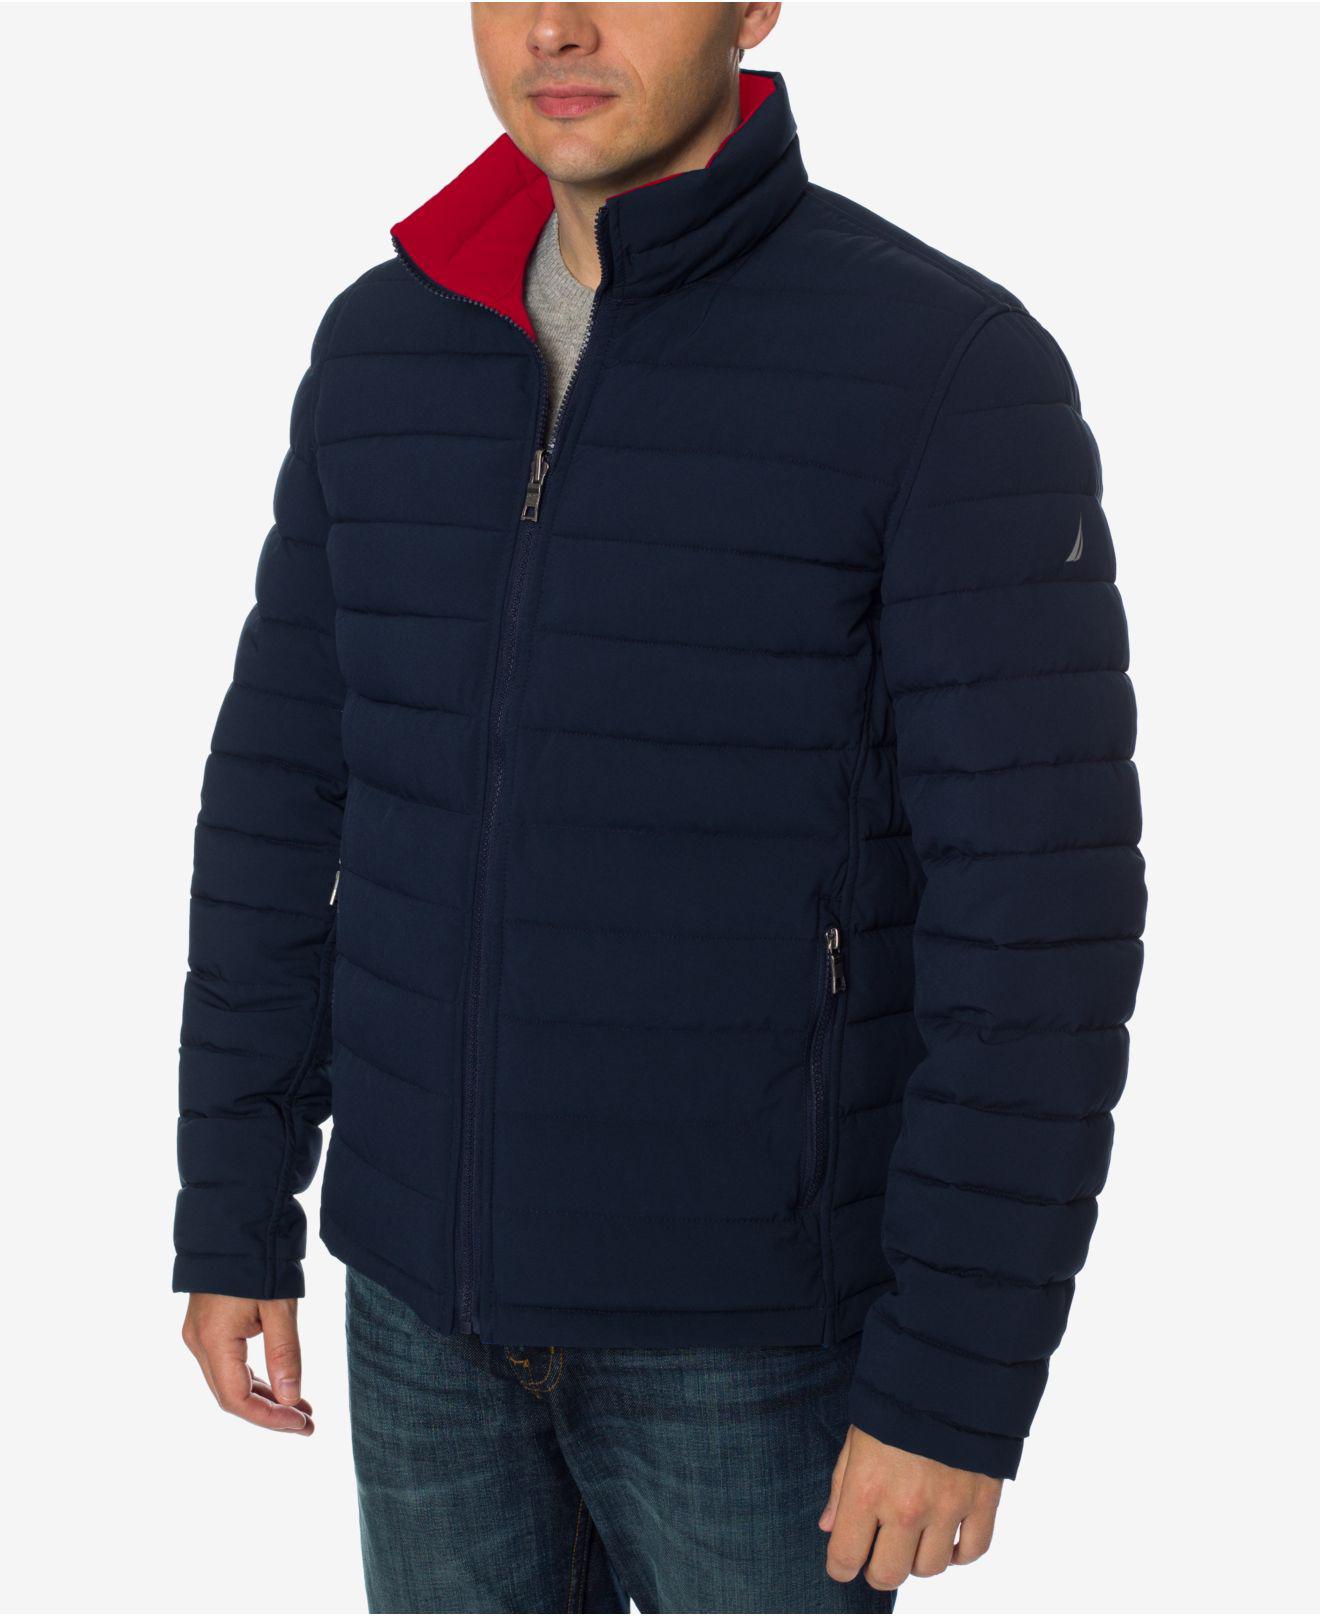 Nautica Men’s Quilted Stretch Jacket